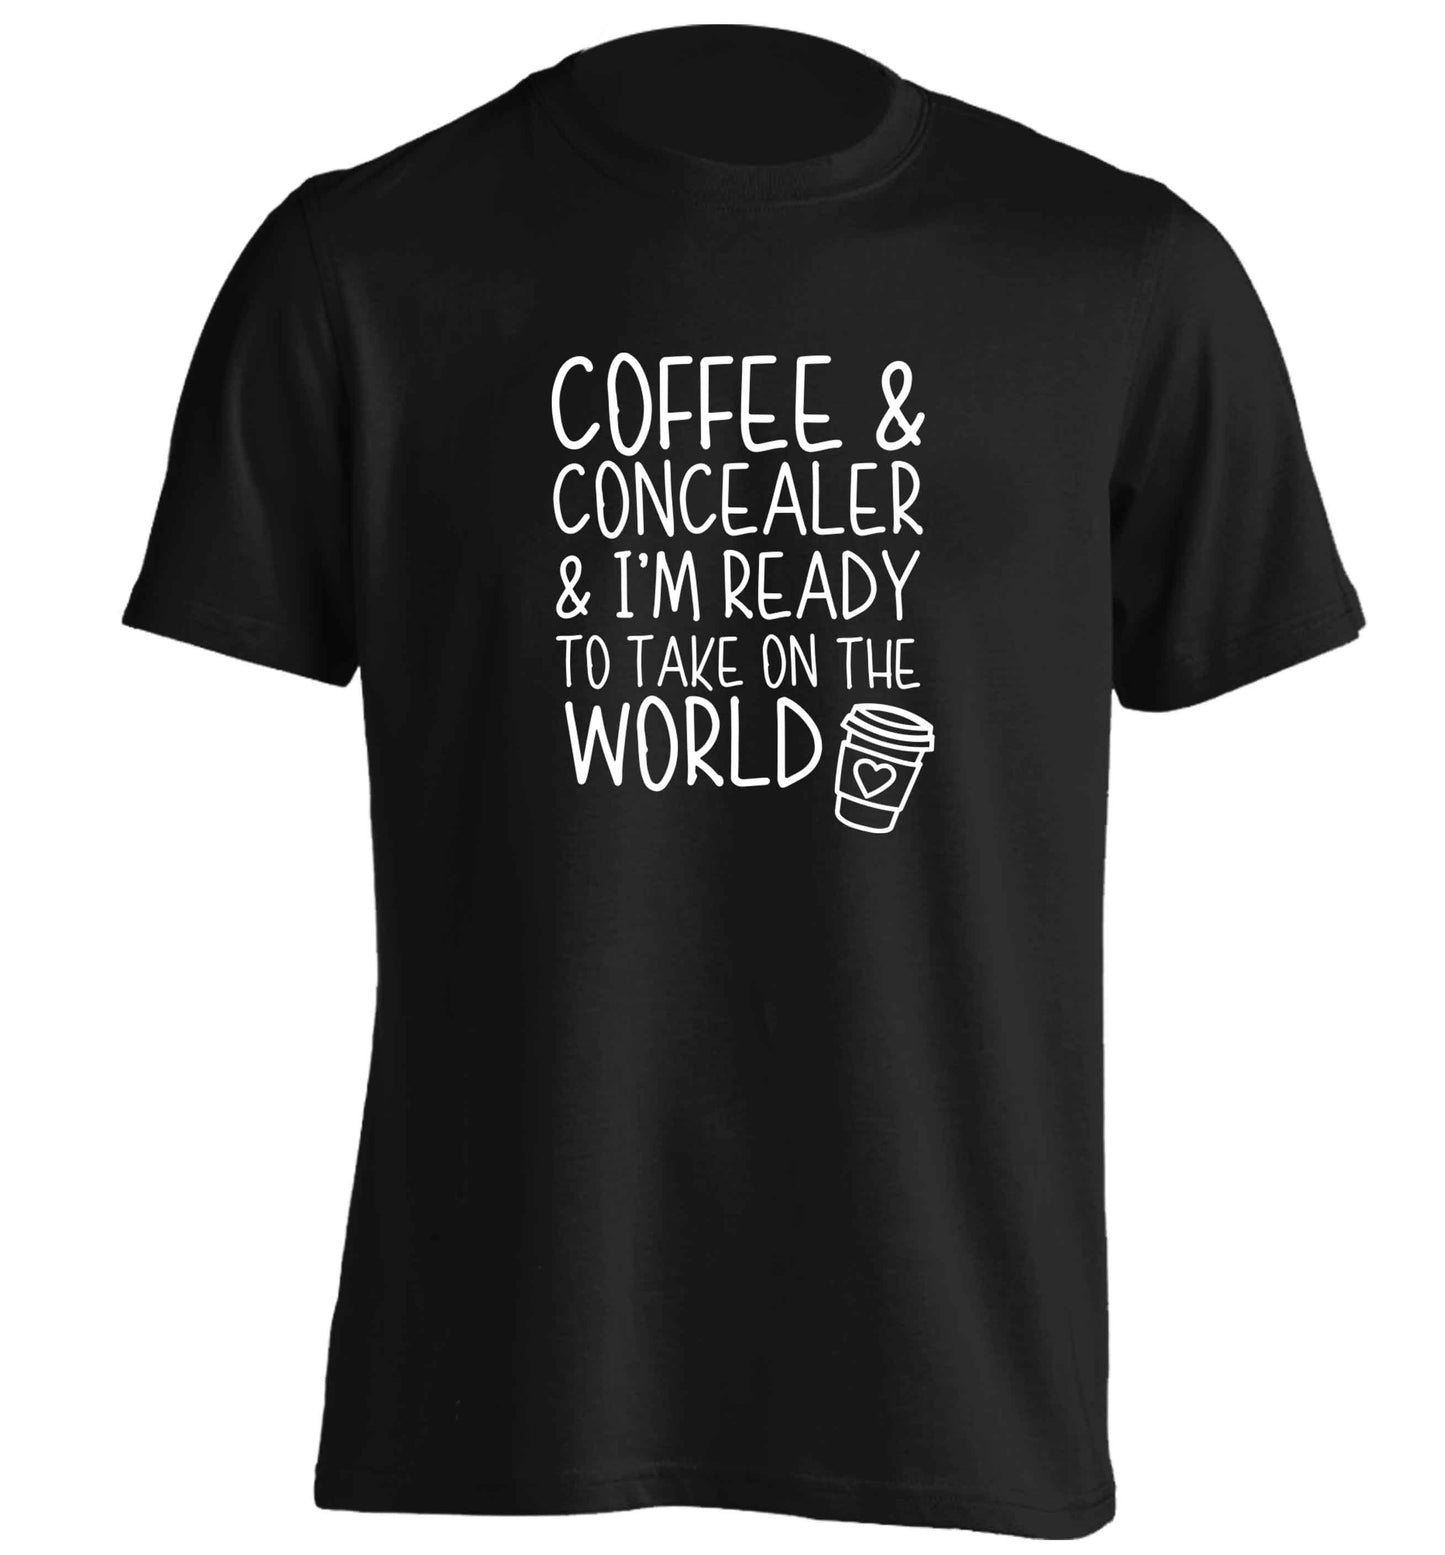 Coffee and concealer and I'm ready to take on the world adults unisex black Tshirt 2XL